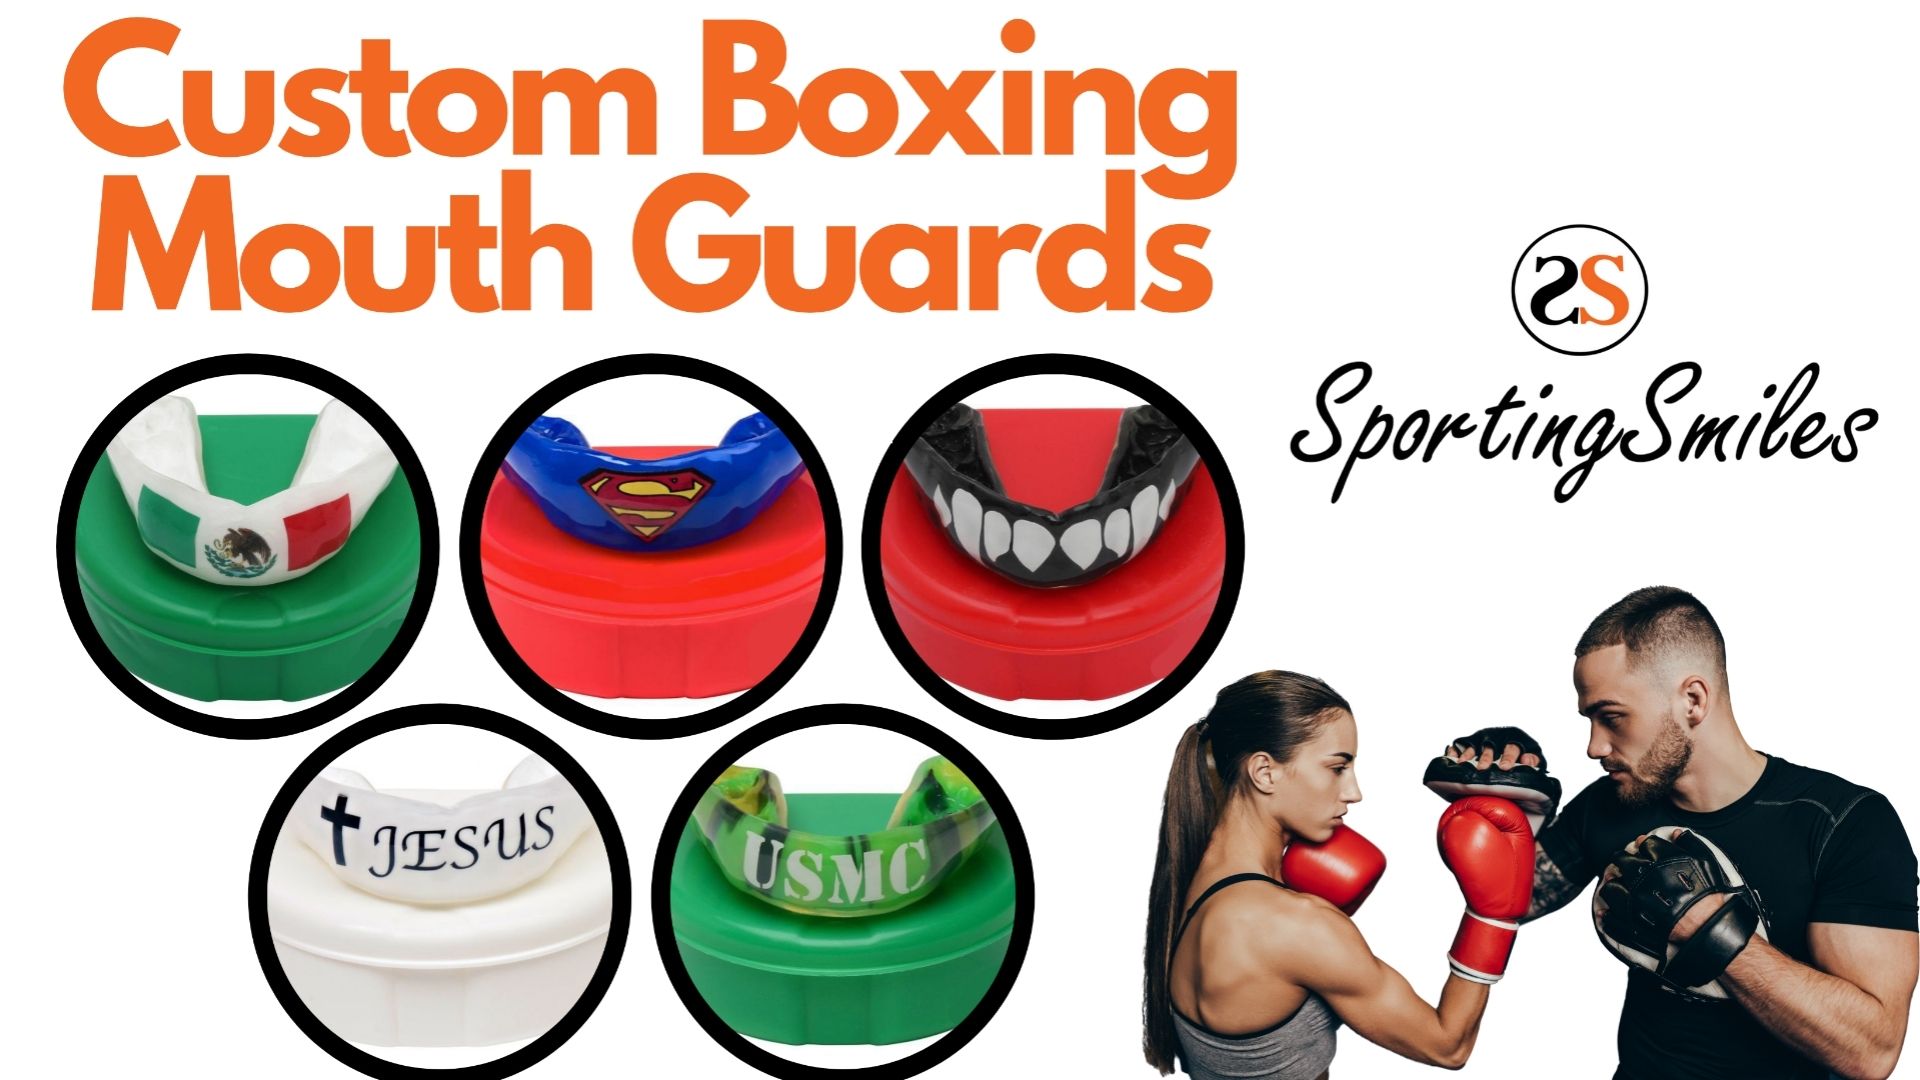 Custom Boxing Mouth Guards